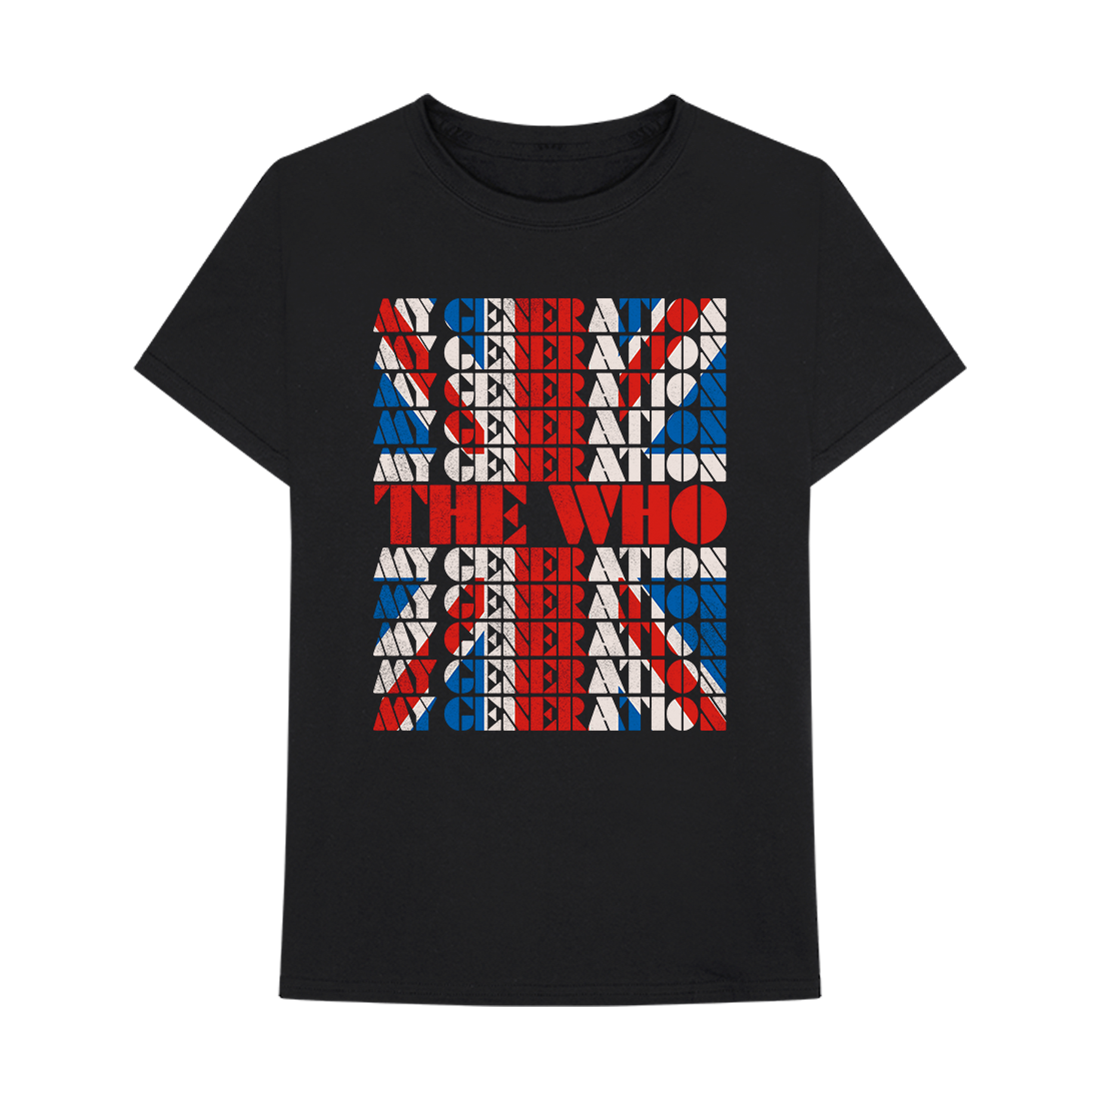 The Who - My Generation Union Jack Tee 